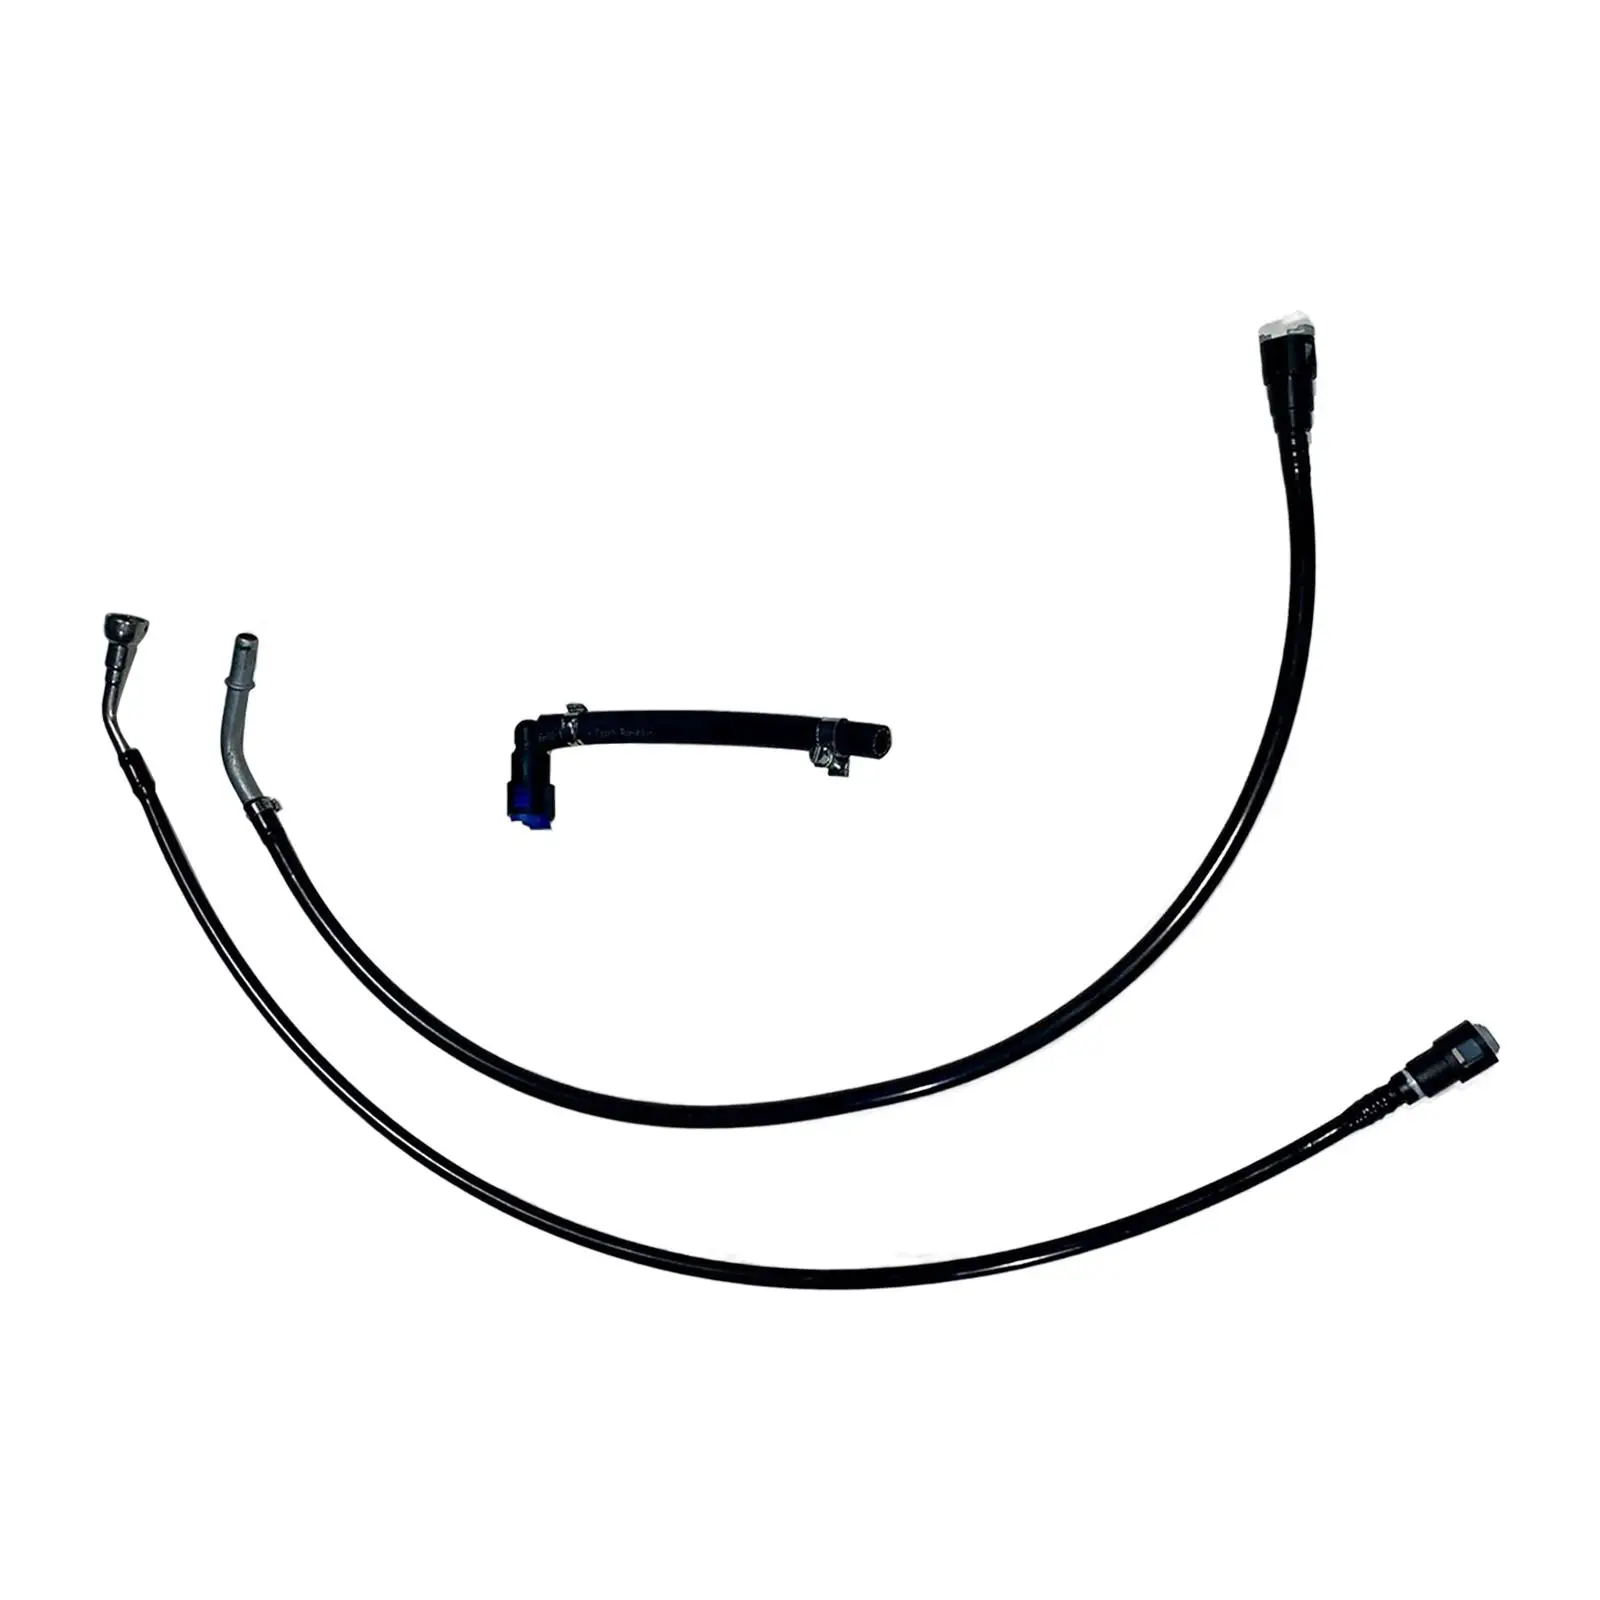 Fuel Line Set Easy Installation Durable Spare Parts fl Fg0918 Car Accessories Replacement Jeep 1999-2004 Grand Cherokee